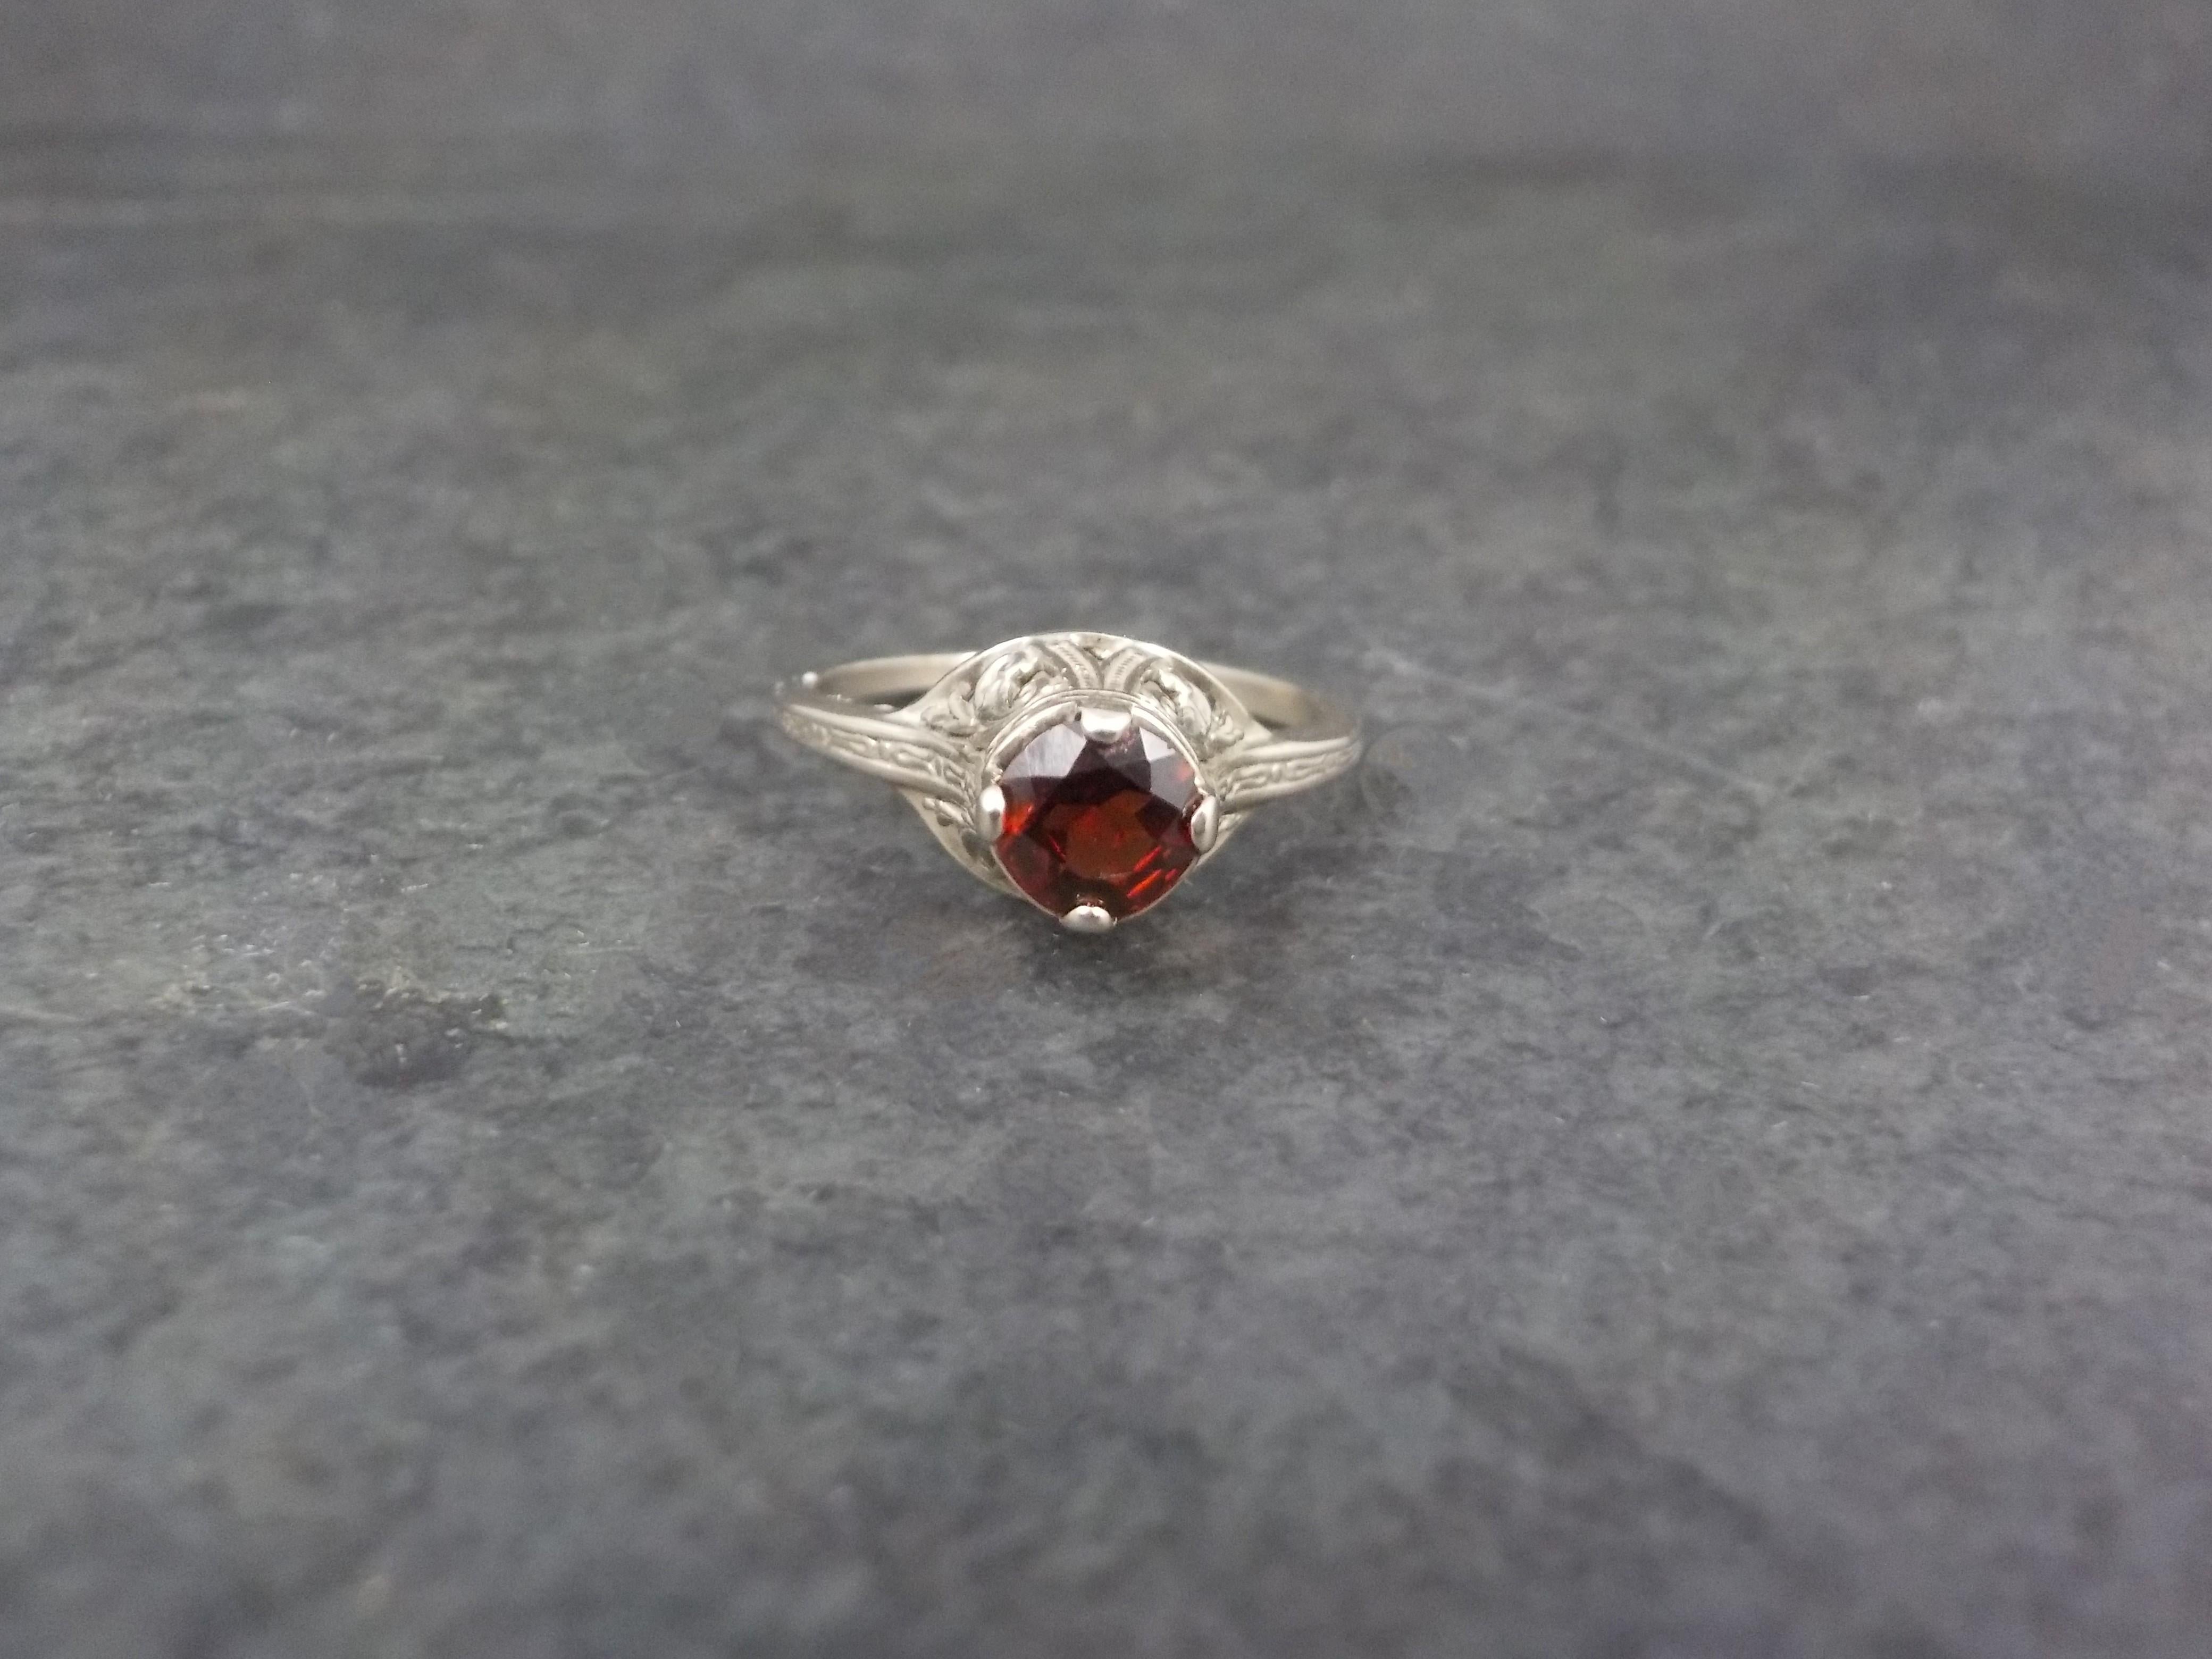 This beautiful le style moderne filigree ring is 14k white gold with a natural 5mm garnet gemstone.

The face of this ring measures 1/4 of an inch north to south with a rise of 7mm off the finger.
Size: 4.75
Marks: 14K

Condition: The band shows